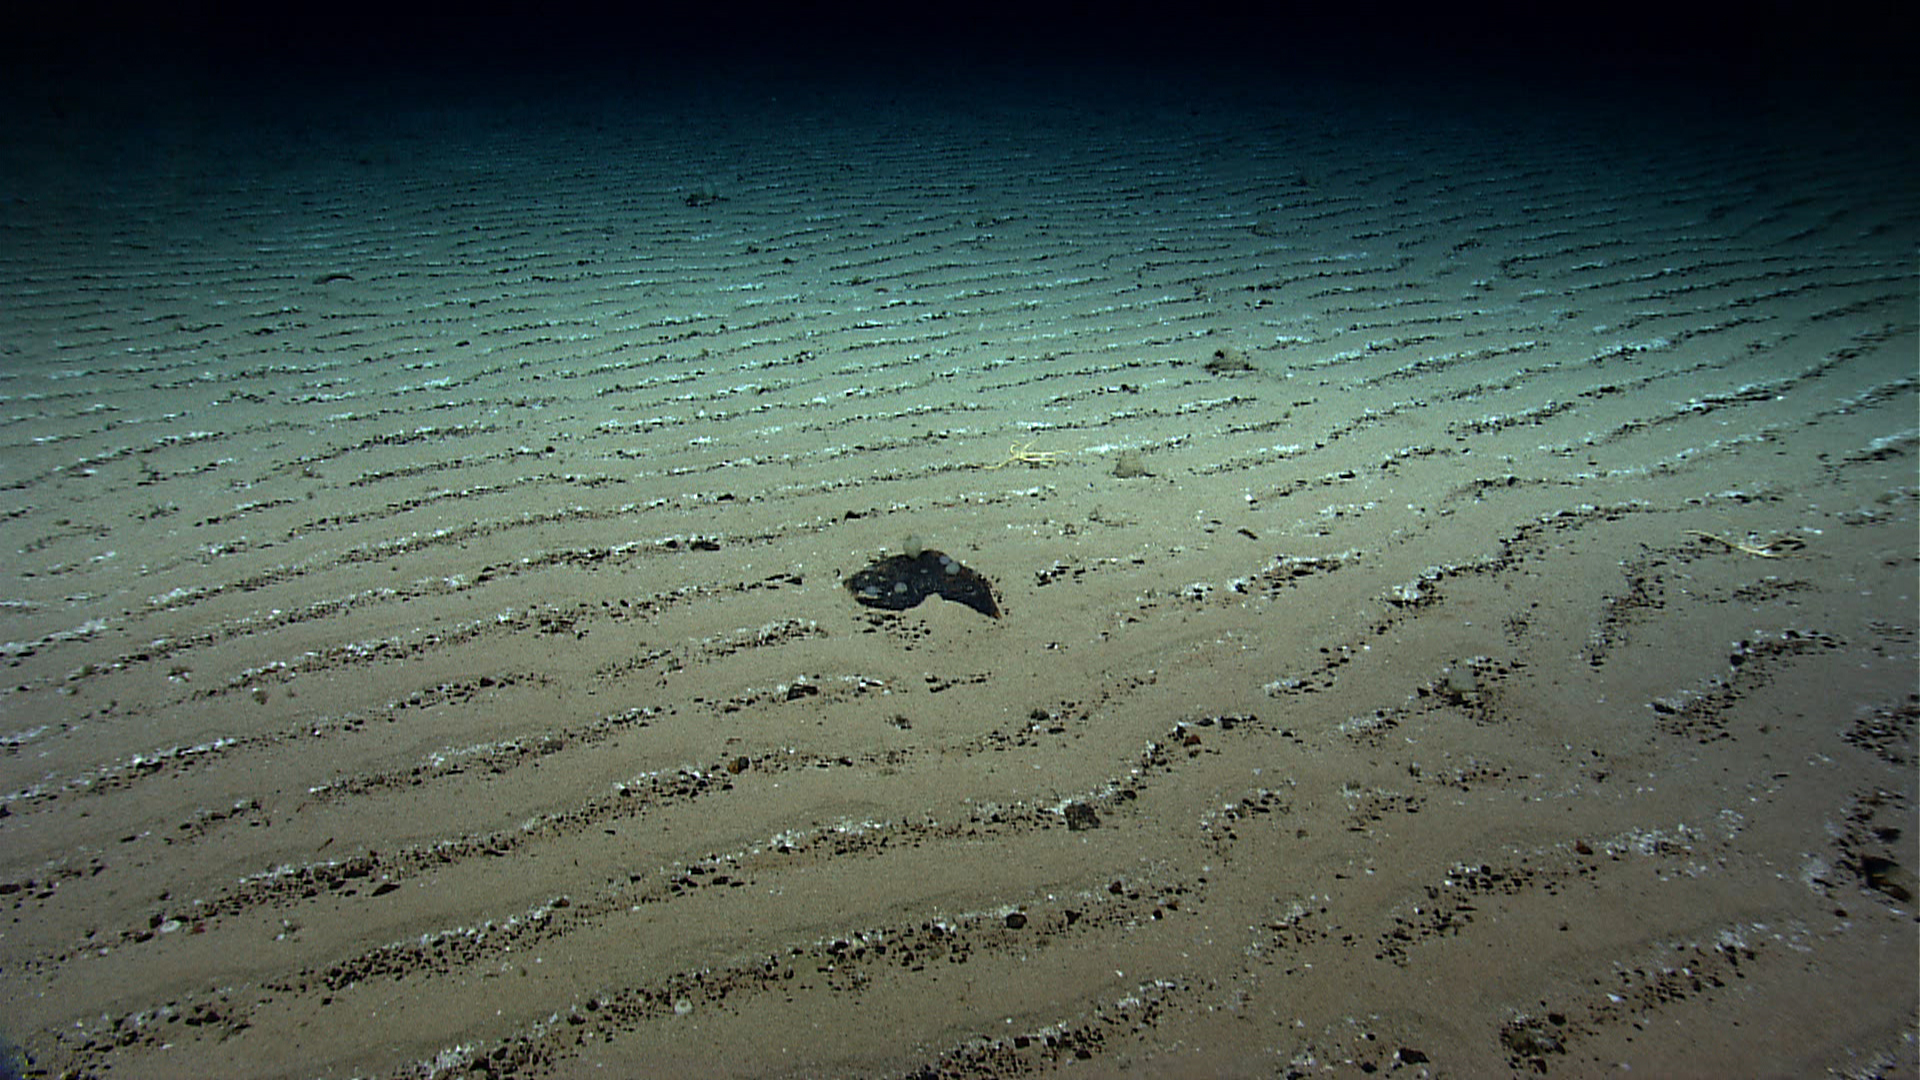 A picture of sediments on the seafloor.